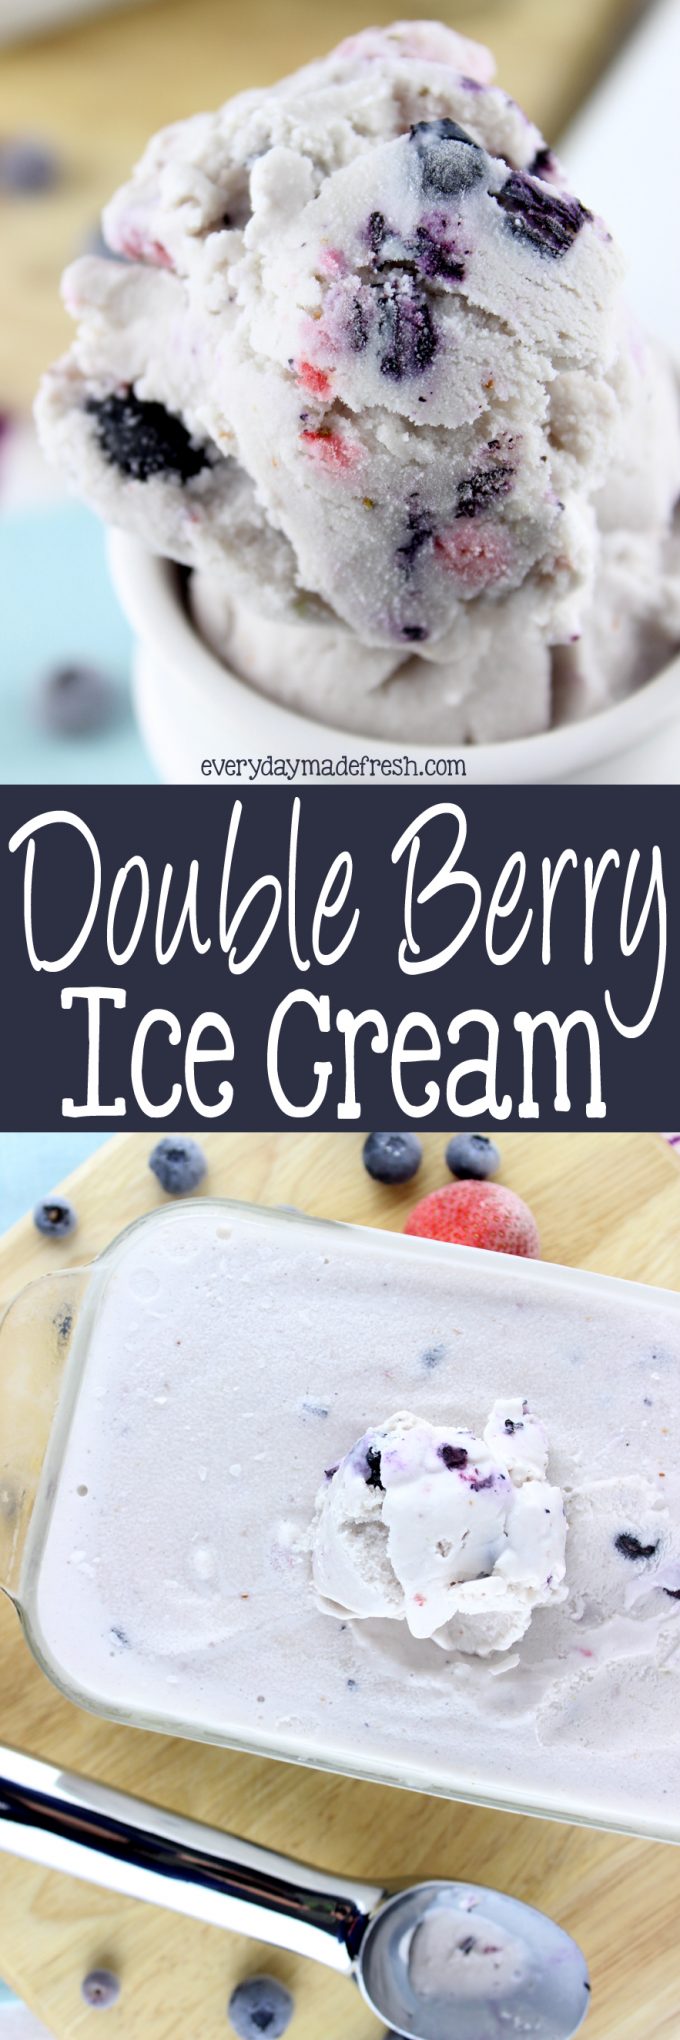 This Double Berry Ice Cream features a custard style base that gives you the perfect richness and texture. The double berries featured here are blueberries and strawberries, but feel free to use your favorites! | EverydayMadeFresh.com